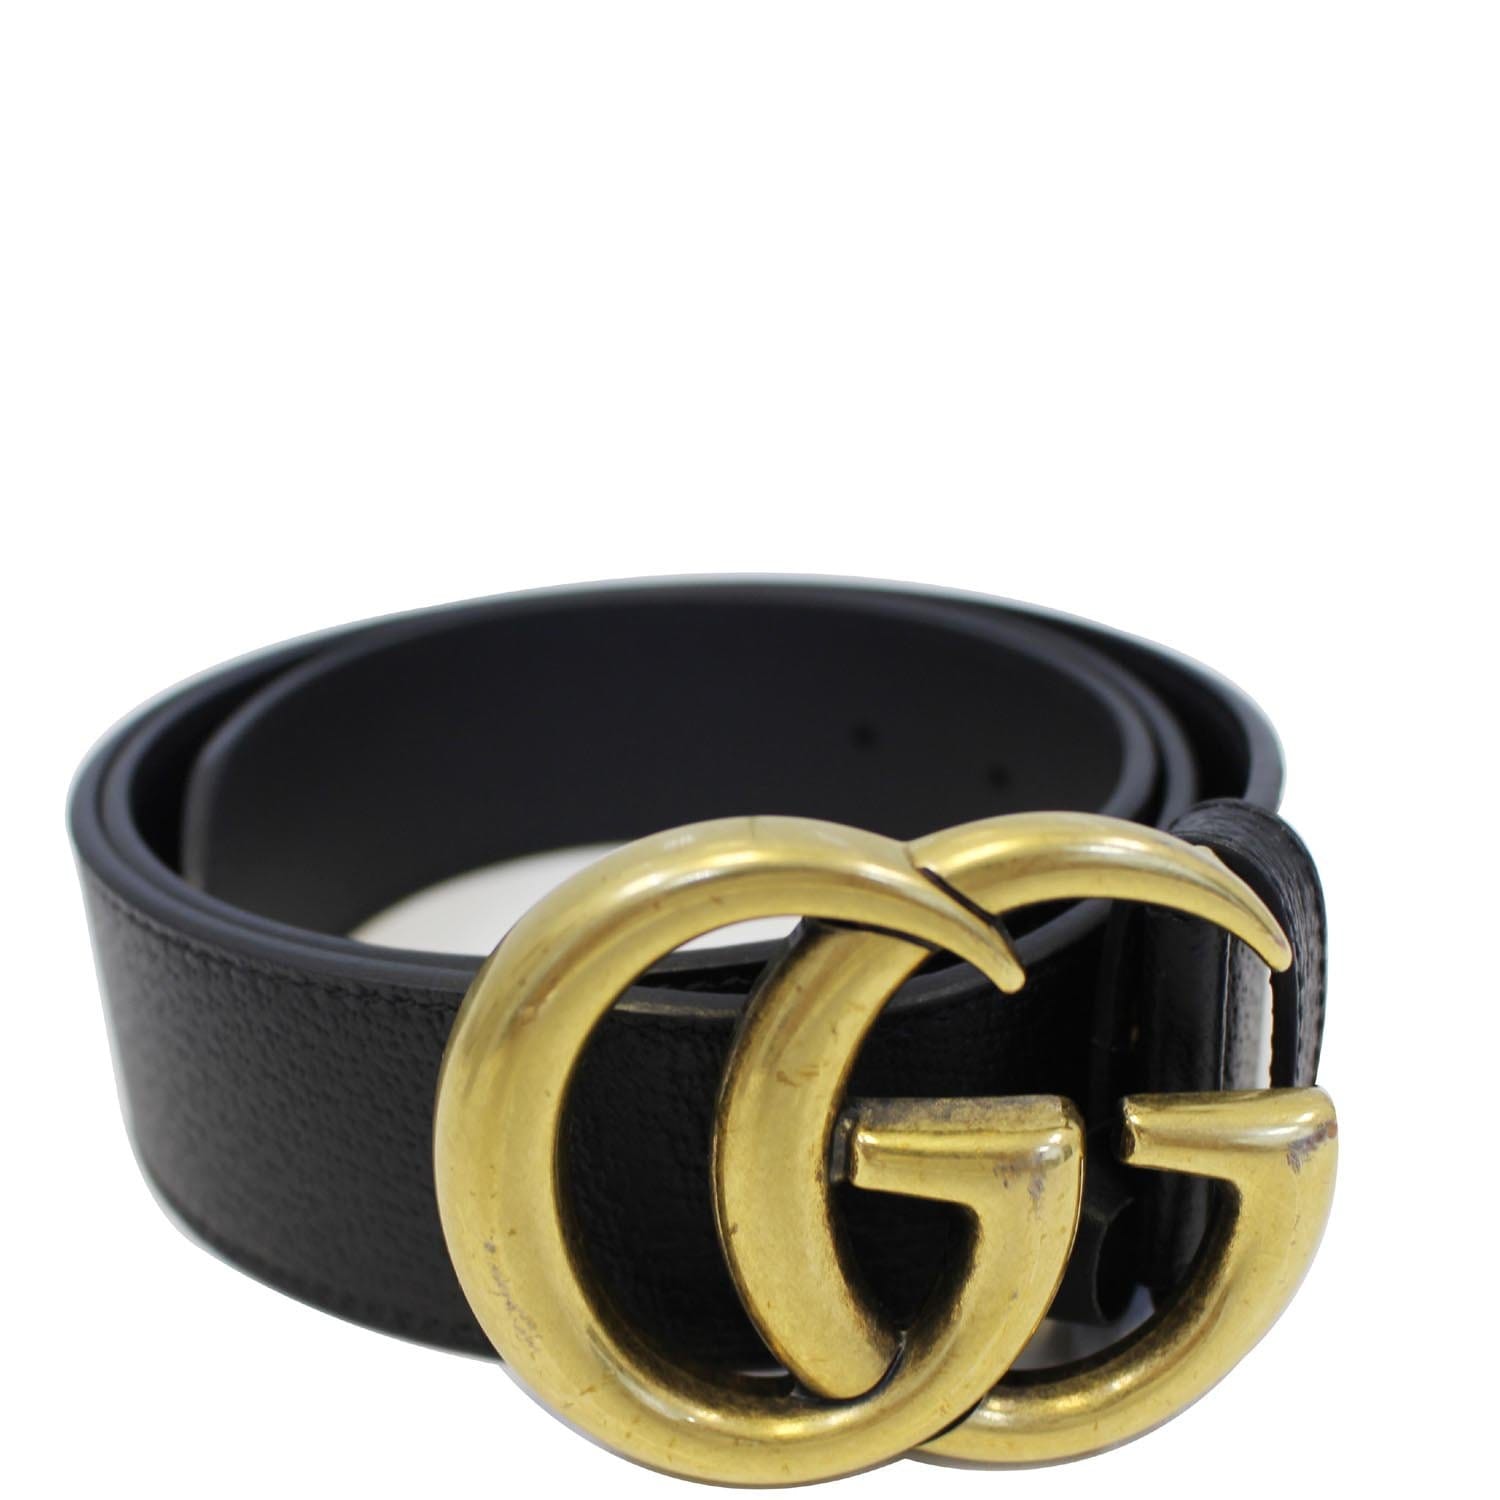 How To Spot A Fake Double G Gucci Belt - Brands Blogger